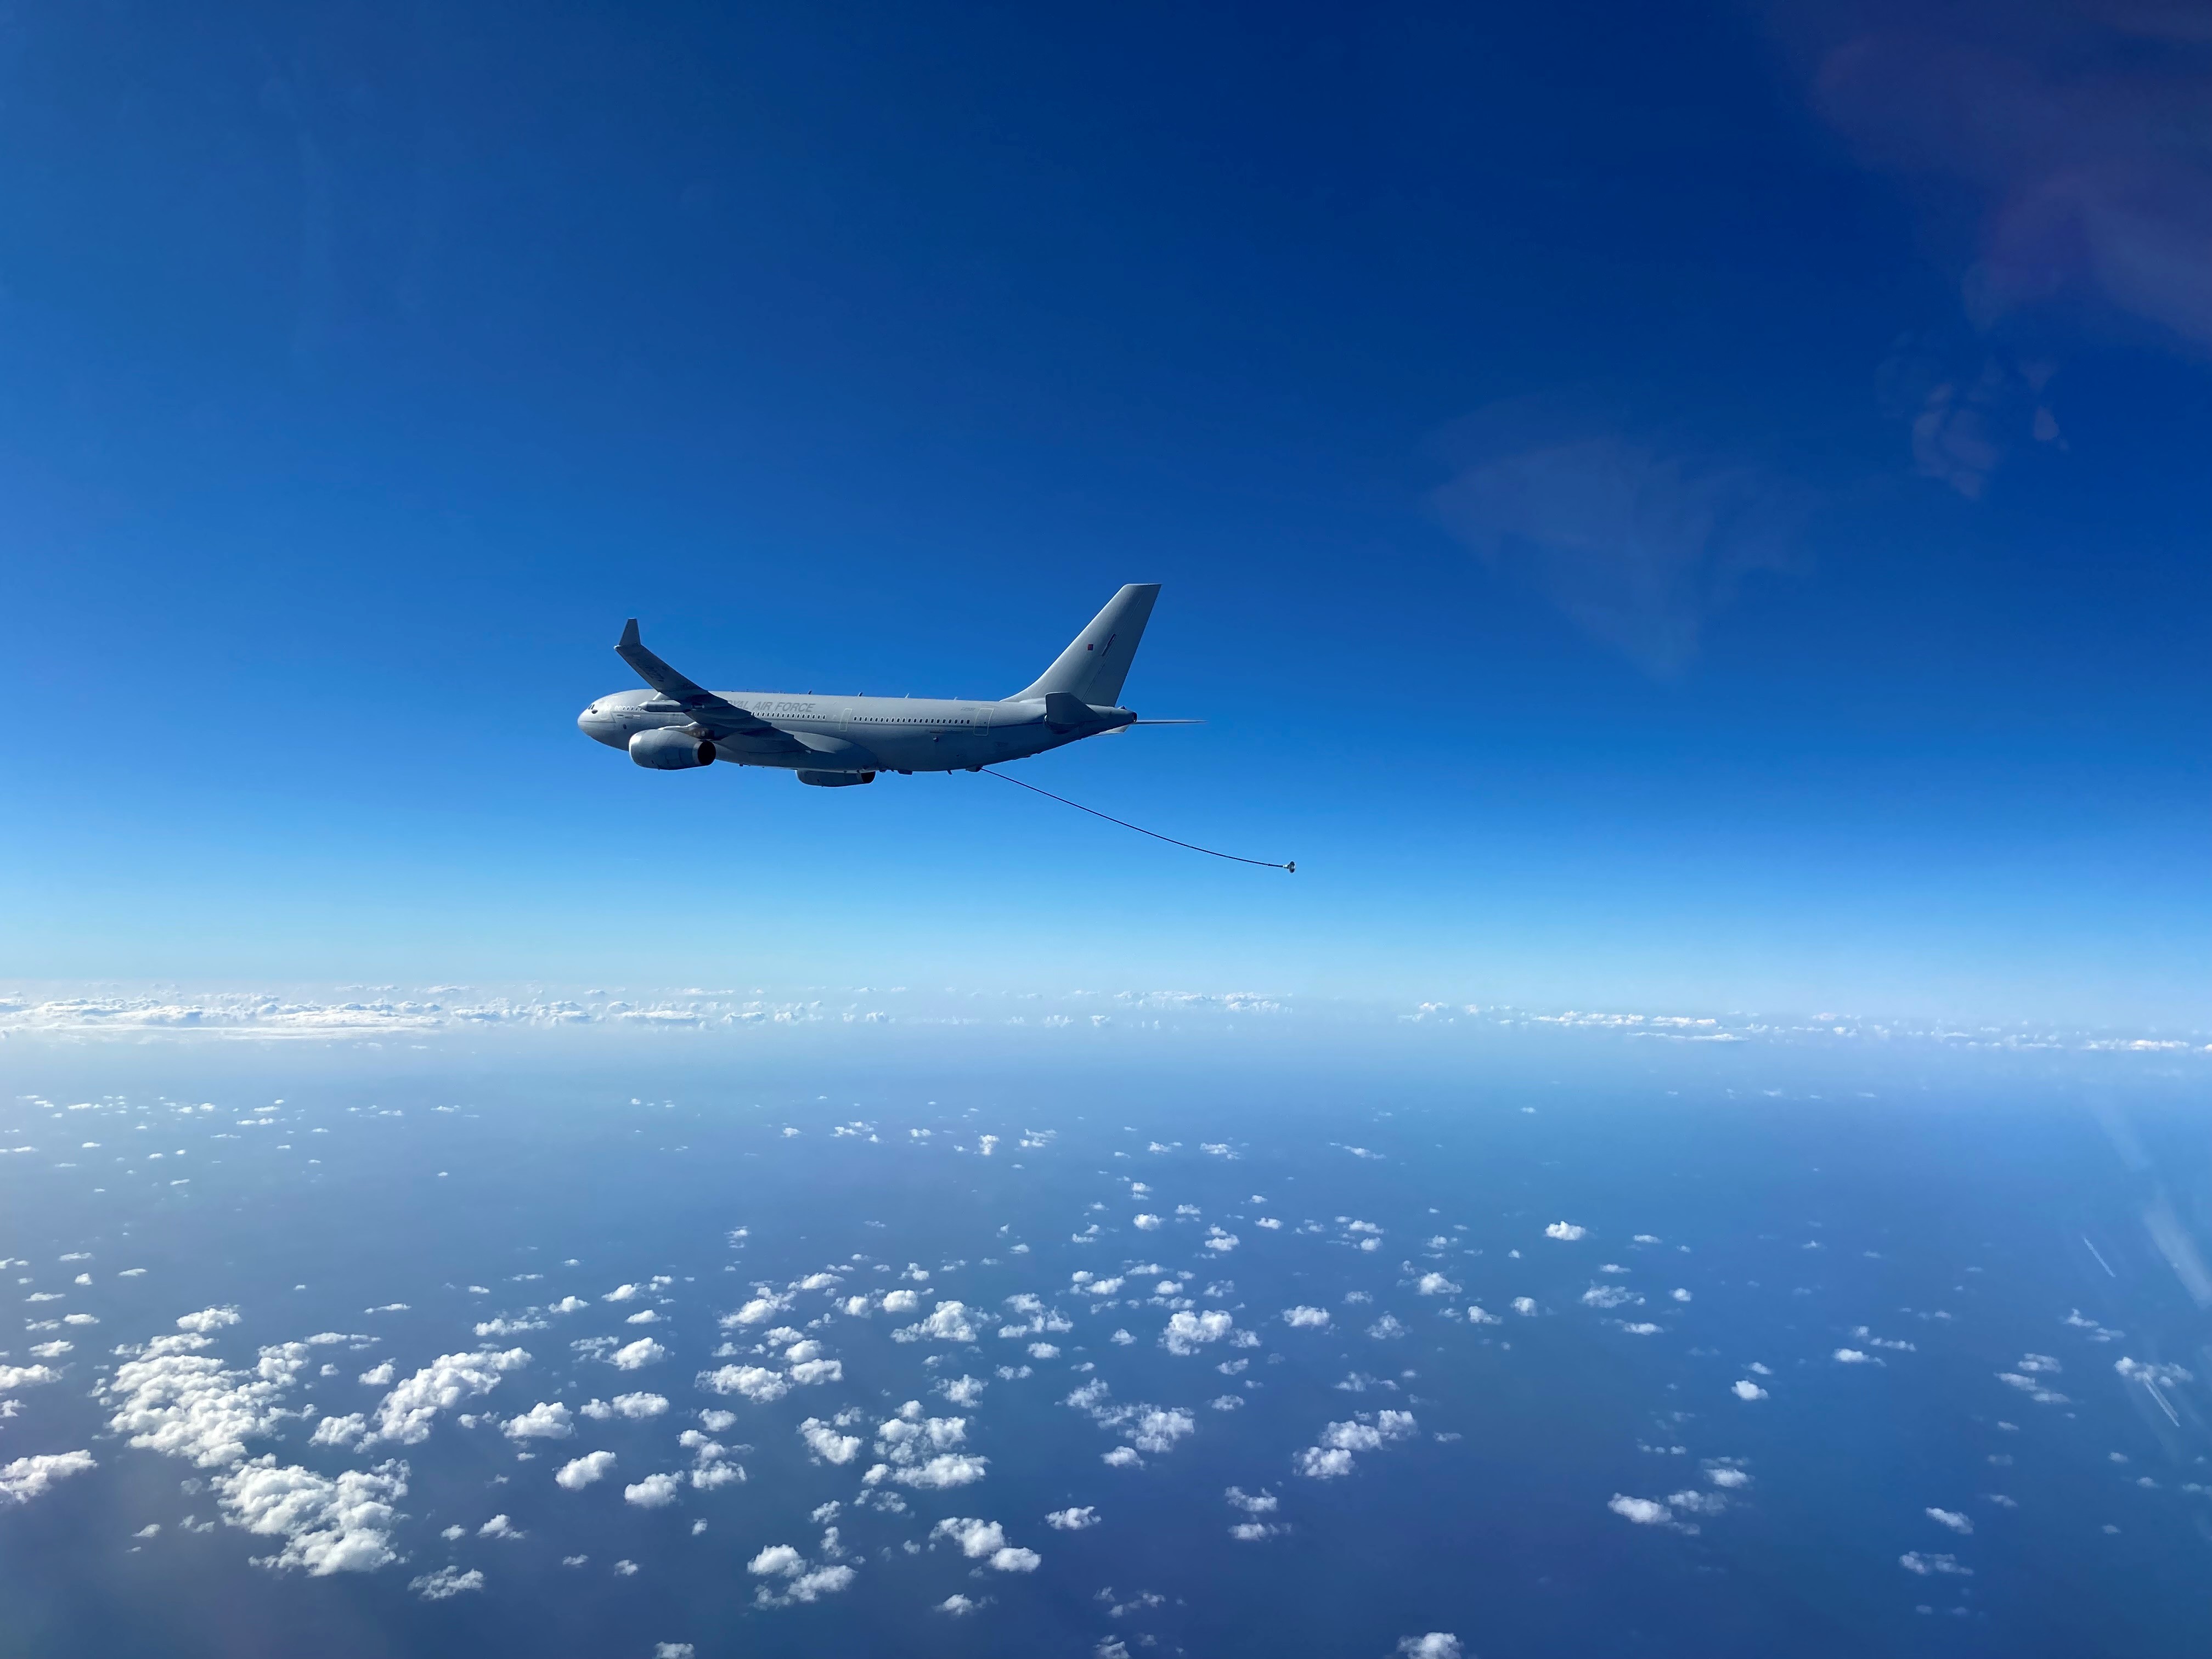 RAF Voyager aircraft flying against a bright blue sky